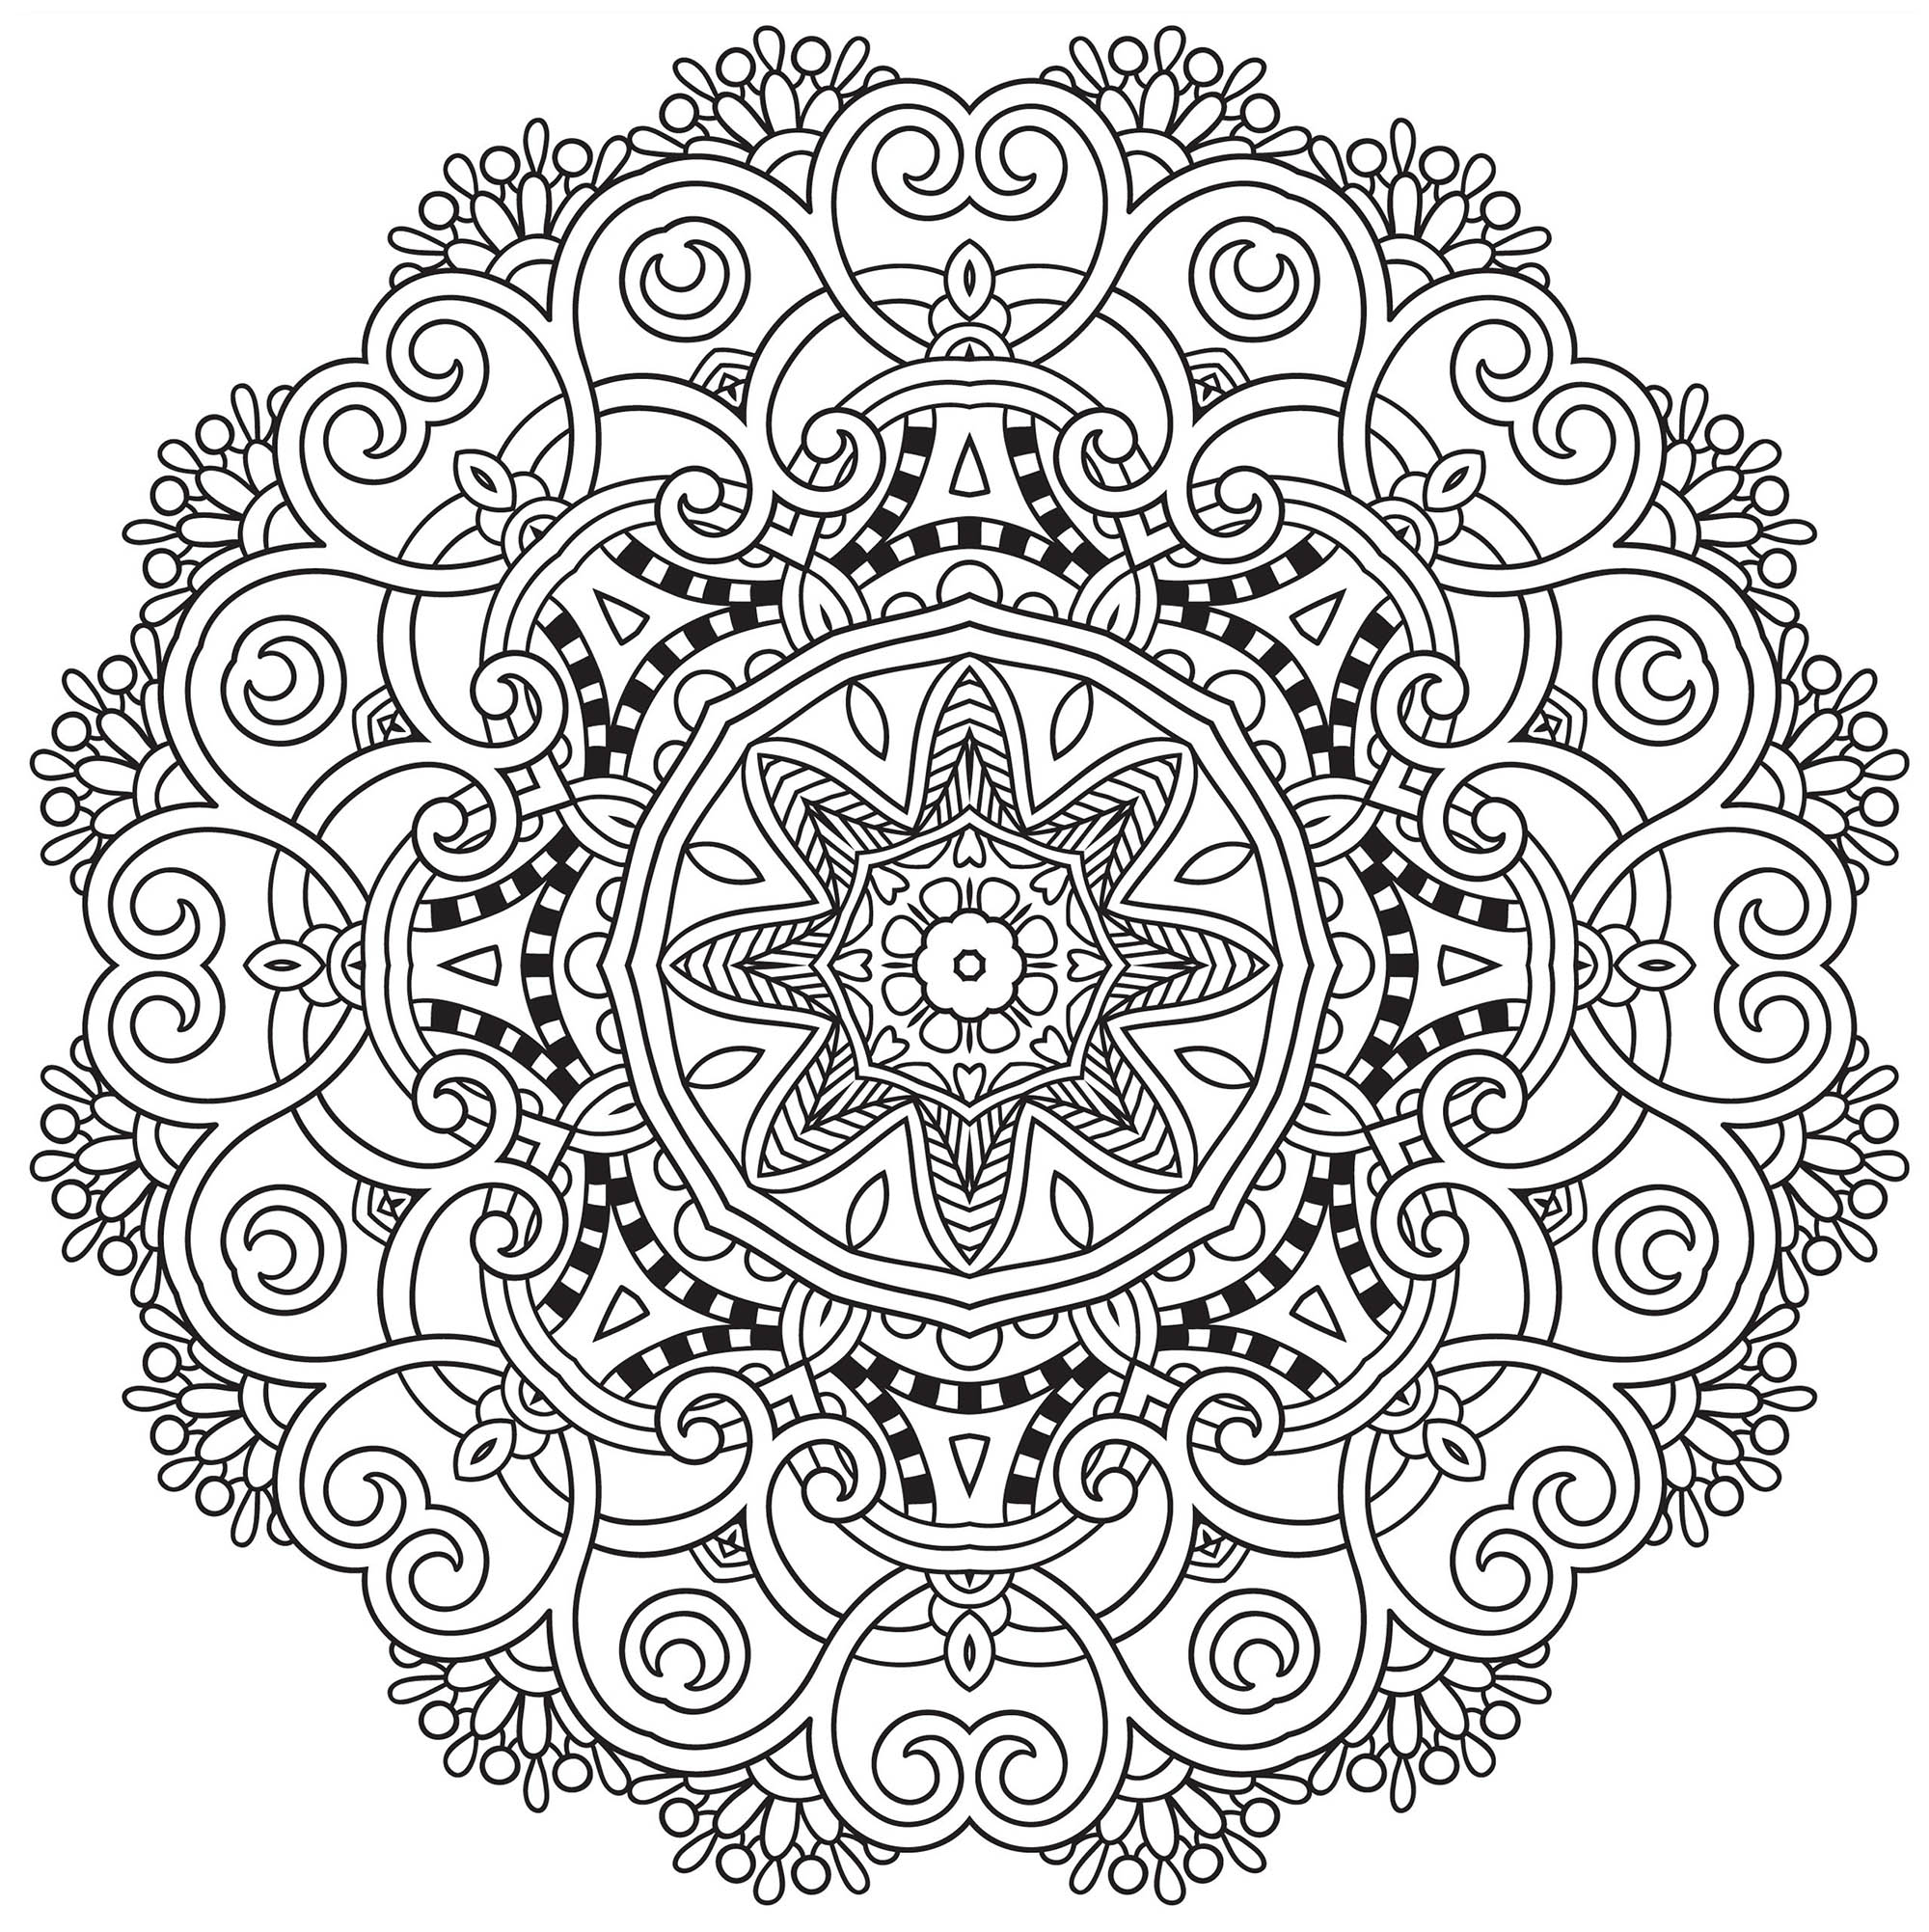 Download Mandala to download in pdf 2 - M&alas Adult Coloring Pages - Page 2